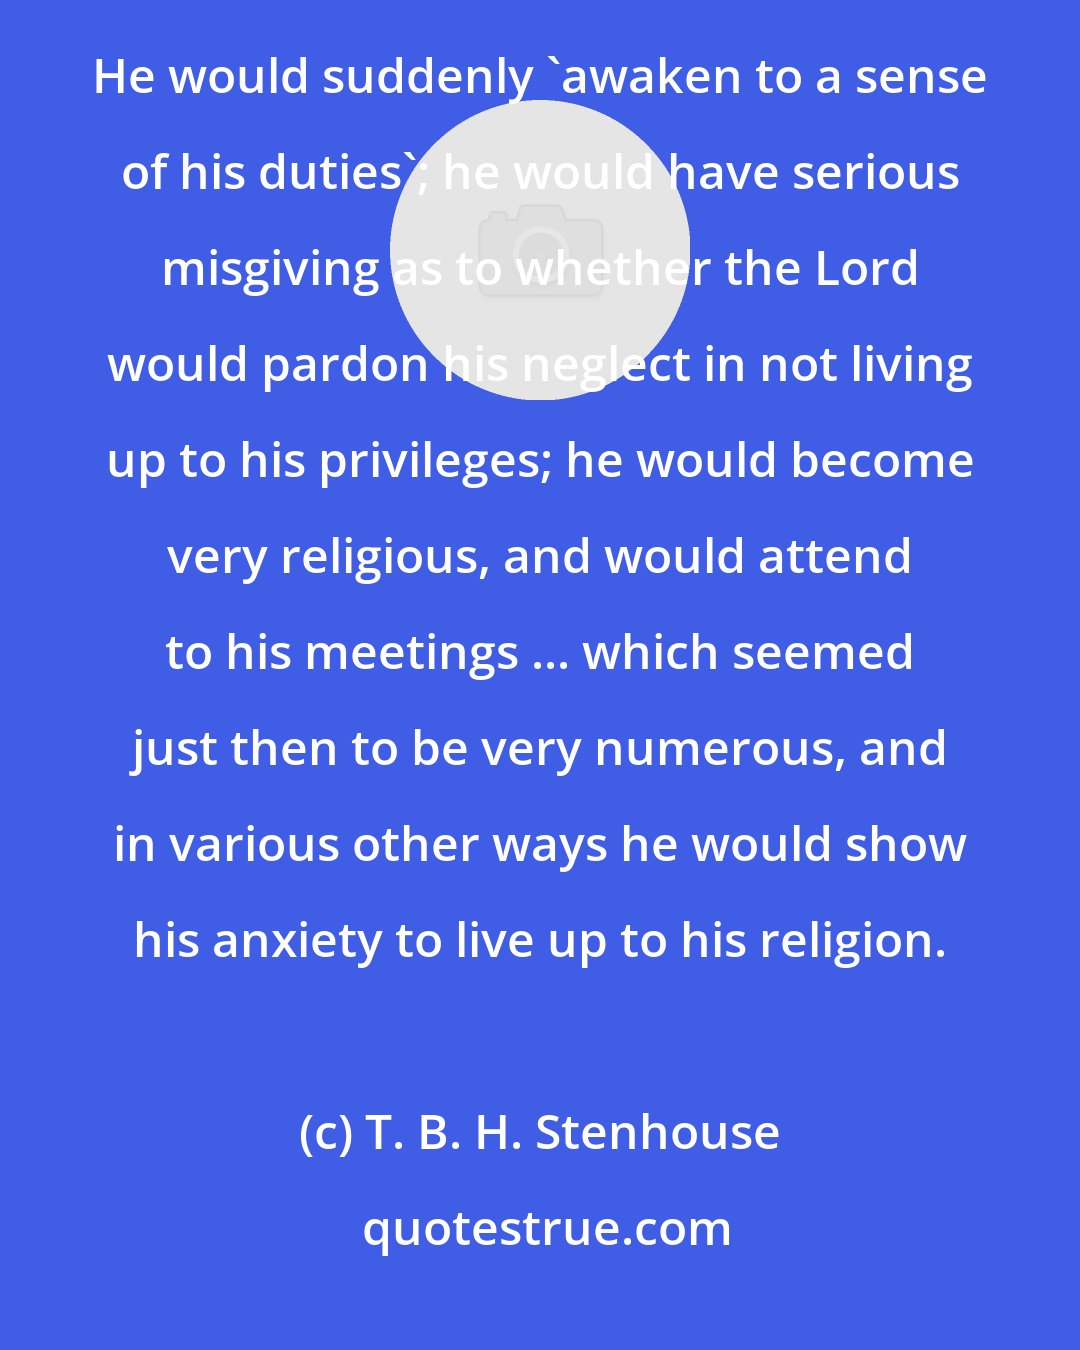 T. B. H. Stenhouse: I discovered several never-failing signs by which one might know when a man wished to take another wife. He would suddenly 'awaken to a sense of his duties'; he would have serious misgiving as to whether the Lord would pardon his neglect in not living up to his privileges; he would become very religious, and would attend to his meetings ... which seemed just then to be very numerous, and in various other ways he would show his anxiety to live up to his religion.